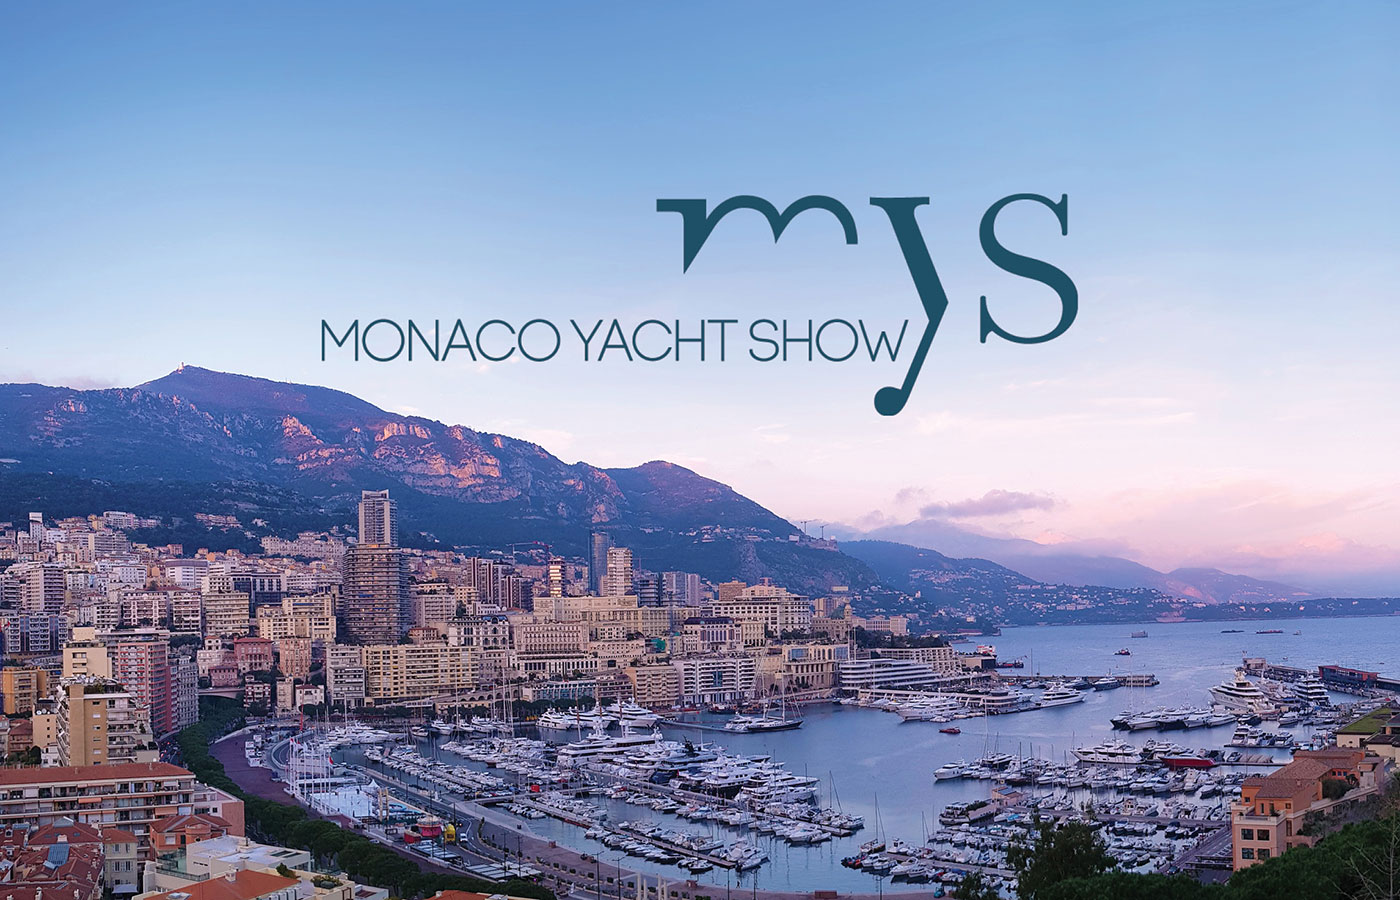 Top 5 Biggest Boats Monaco Yacht Show + Guide